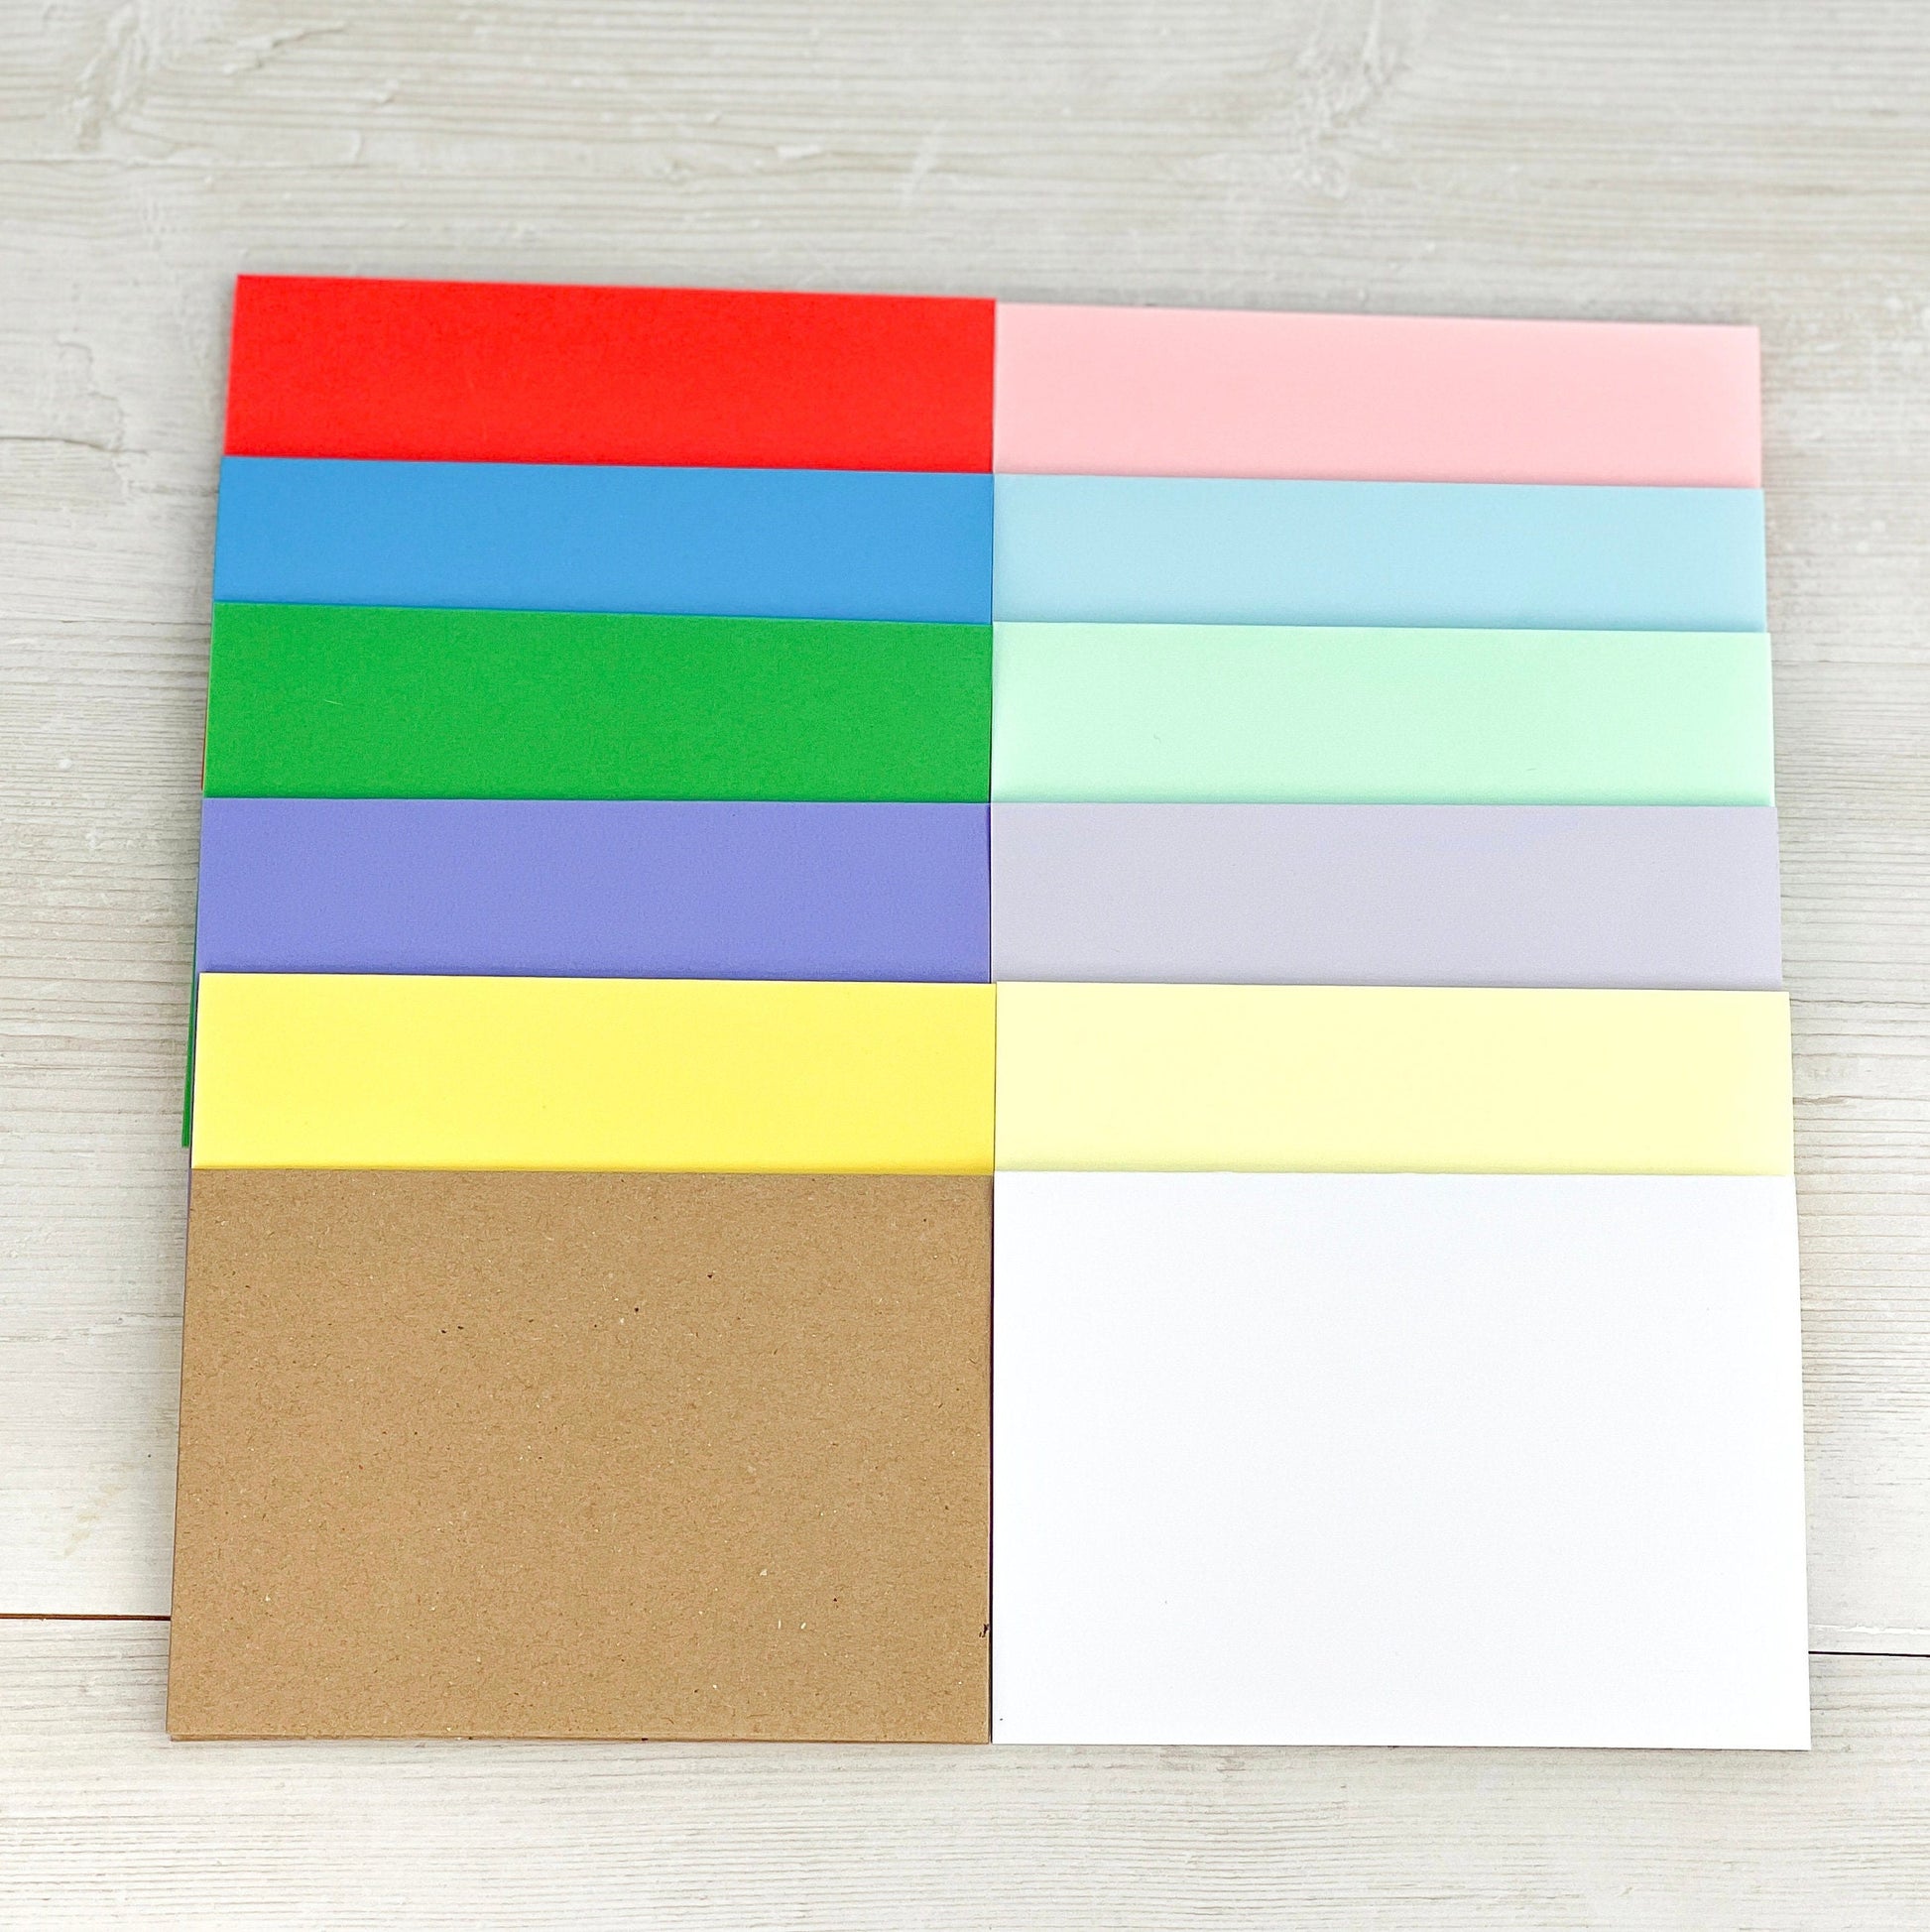 12 blank cards in these colours: vibrant red, blue, green, purple, yellow, pastel pink, blue, green, purple, yellow, white and recycled kraft brown